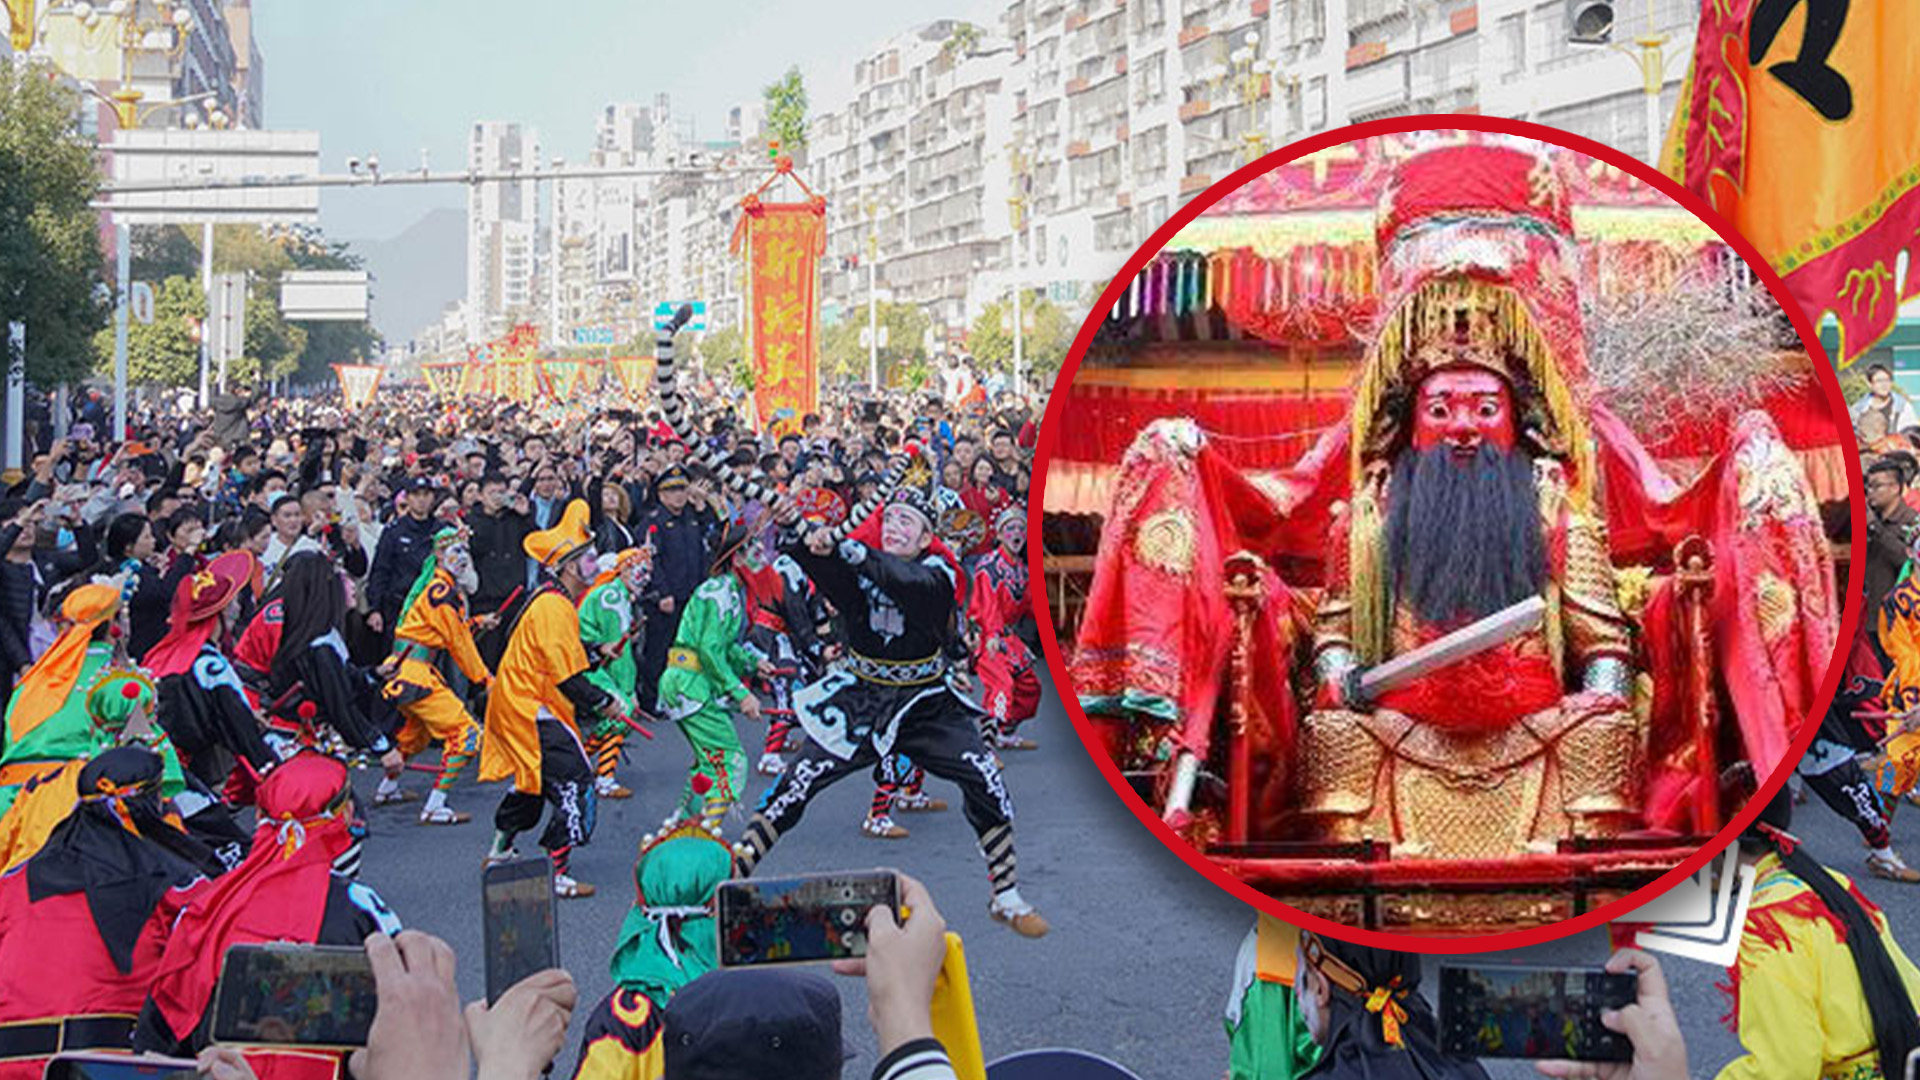 Annually in southern China, around the Lunar New Year, giant, colourful deities called “Wandering Gods” are paraded through the streets of villages. Here the Post explains why. Photo: SCMP composite/Weibo/Sogou